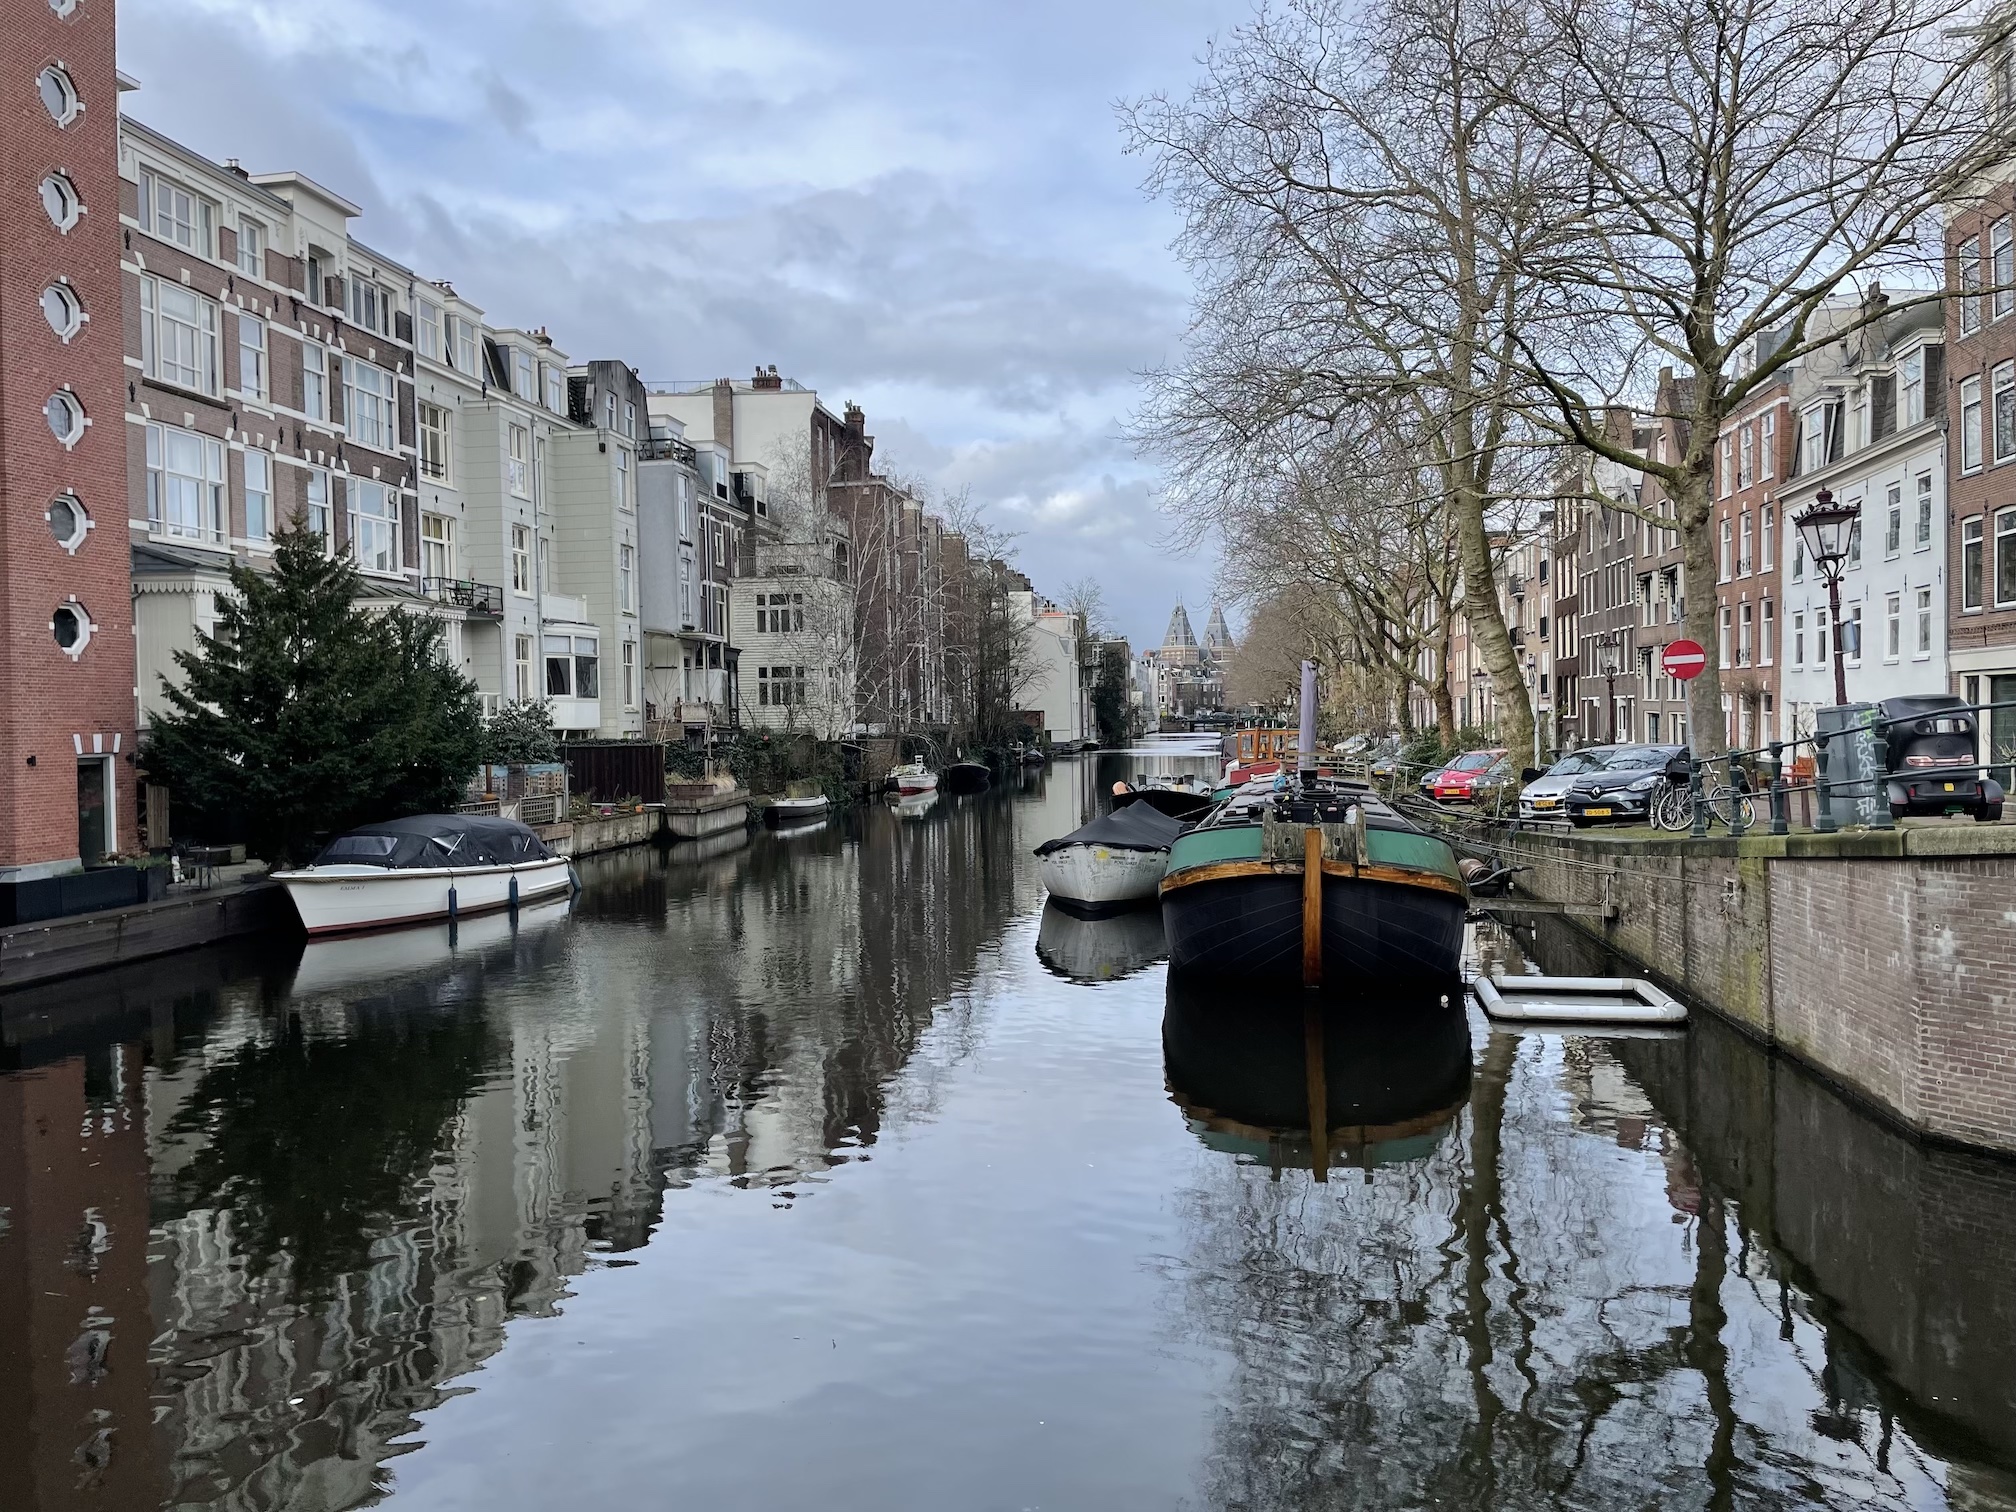 A view of a boat tied up on an Amsterdam canal